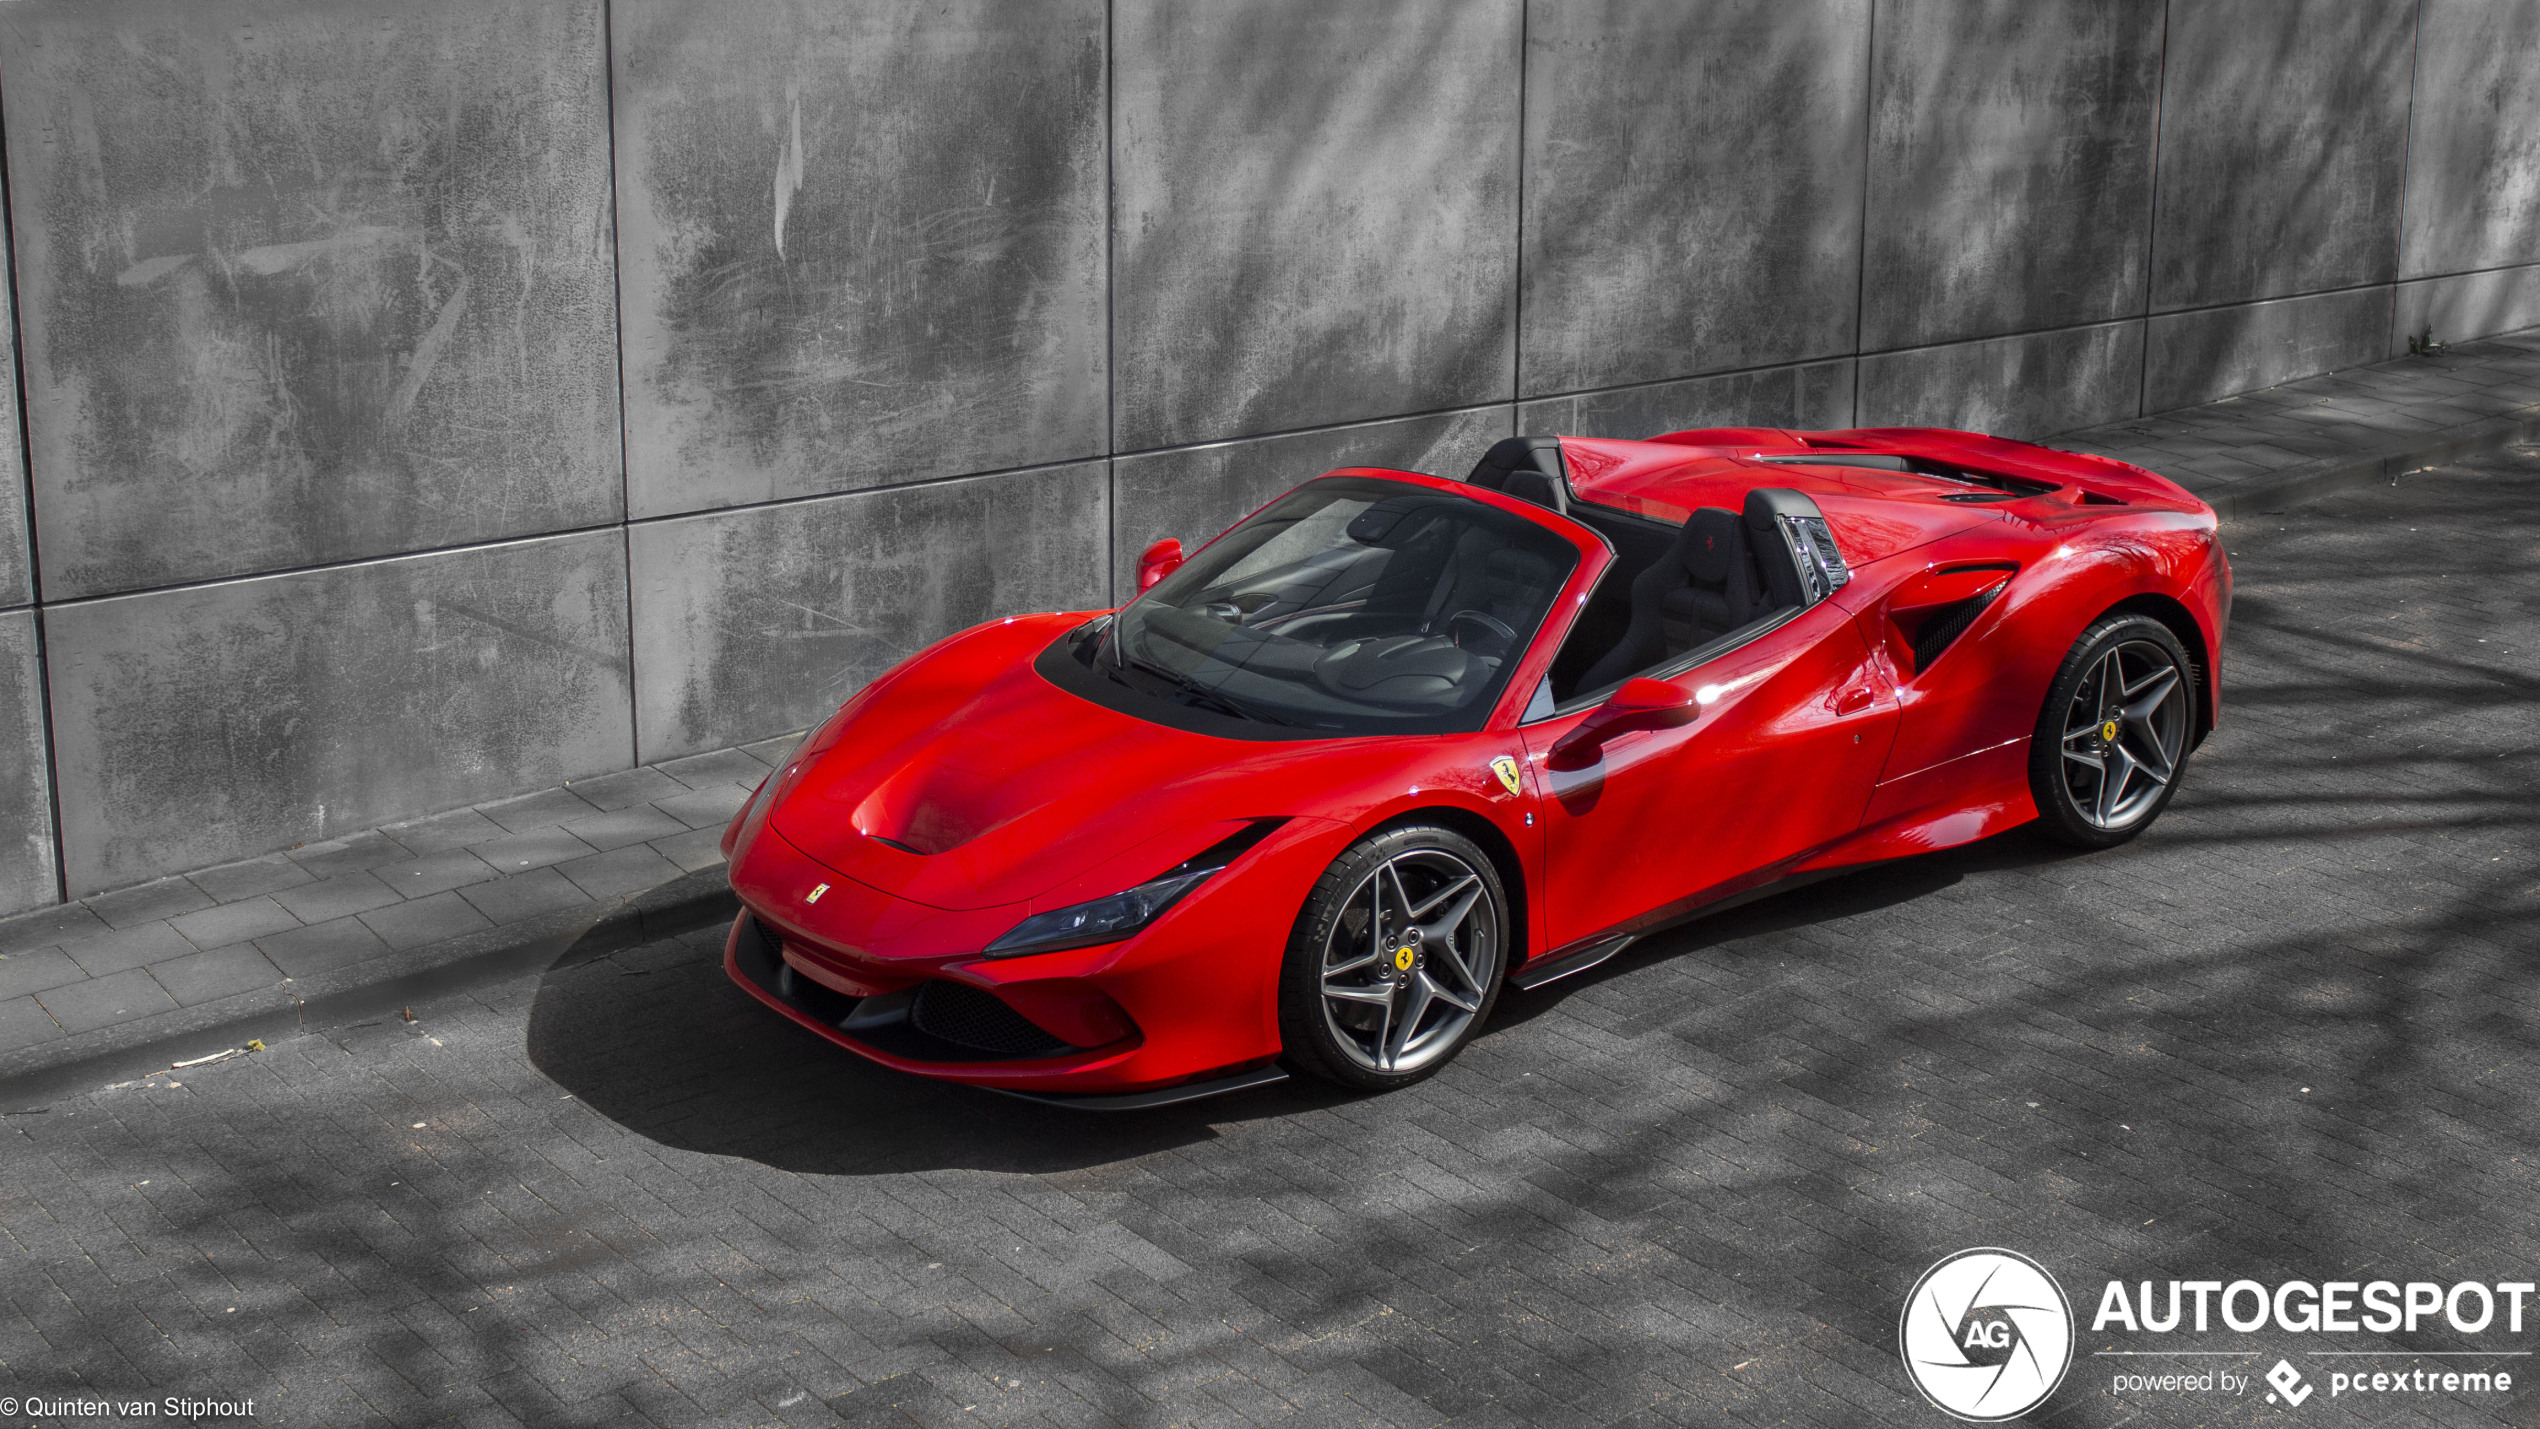 A first on the site: Ferrari F8 Spider